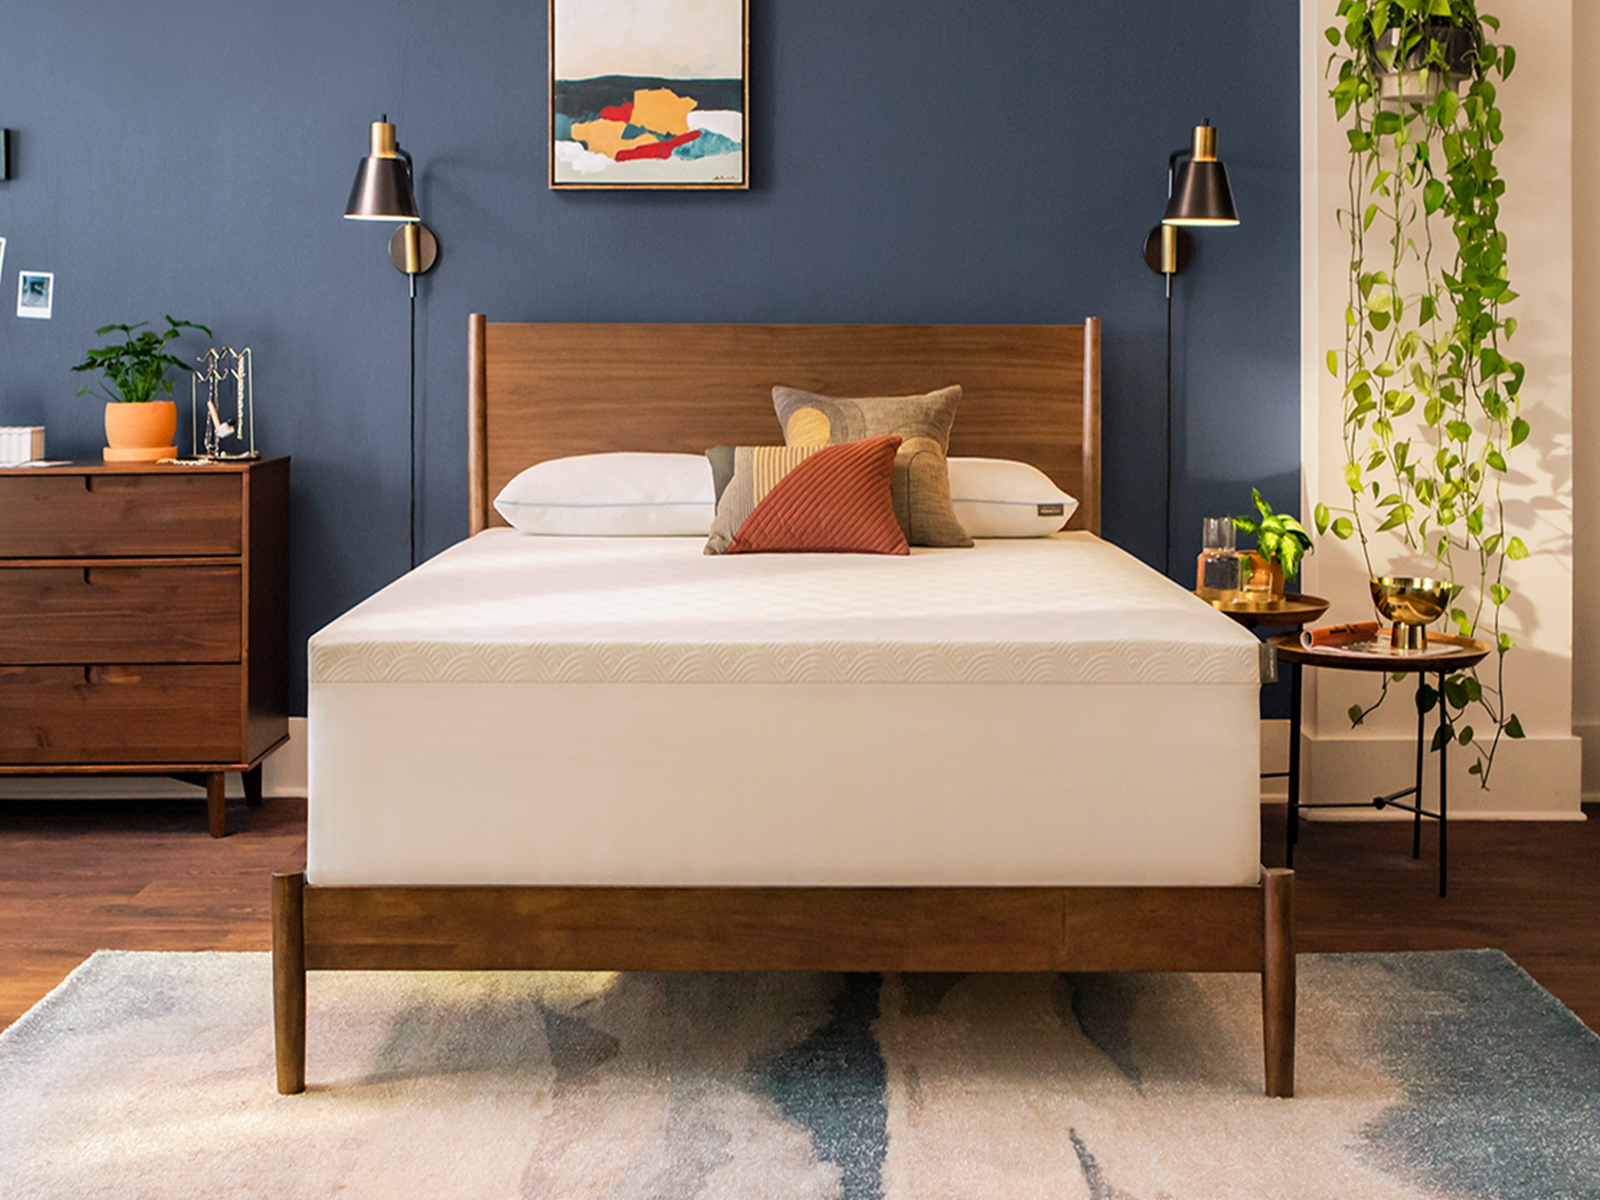 adjustable bed base buying guide